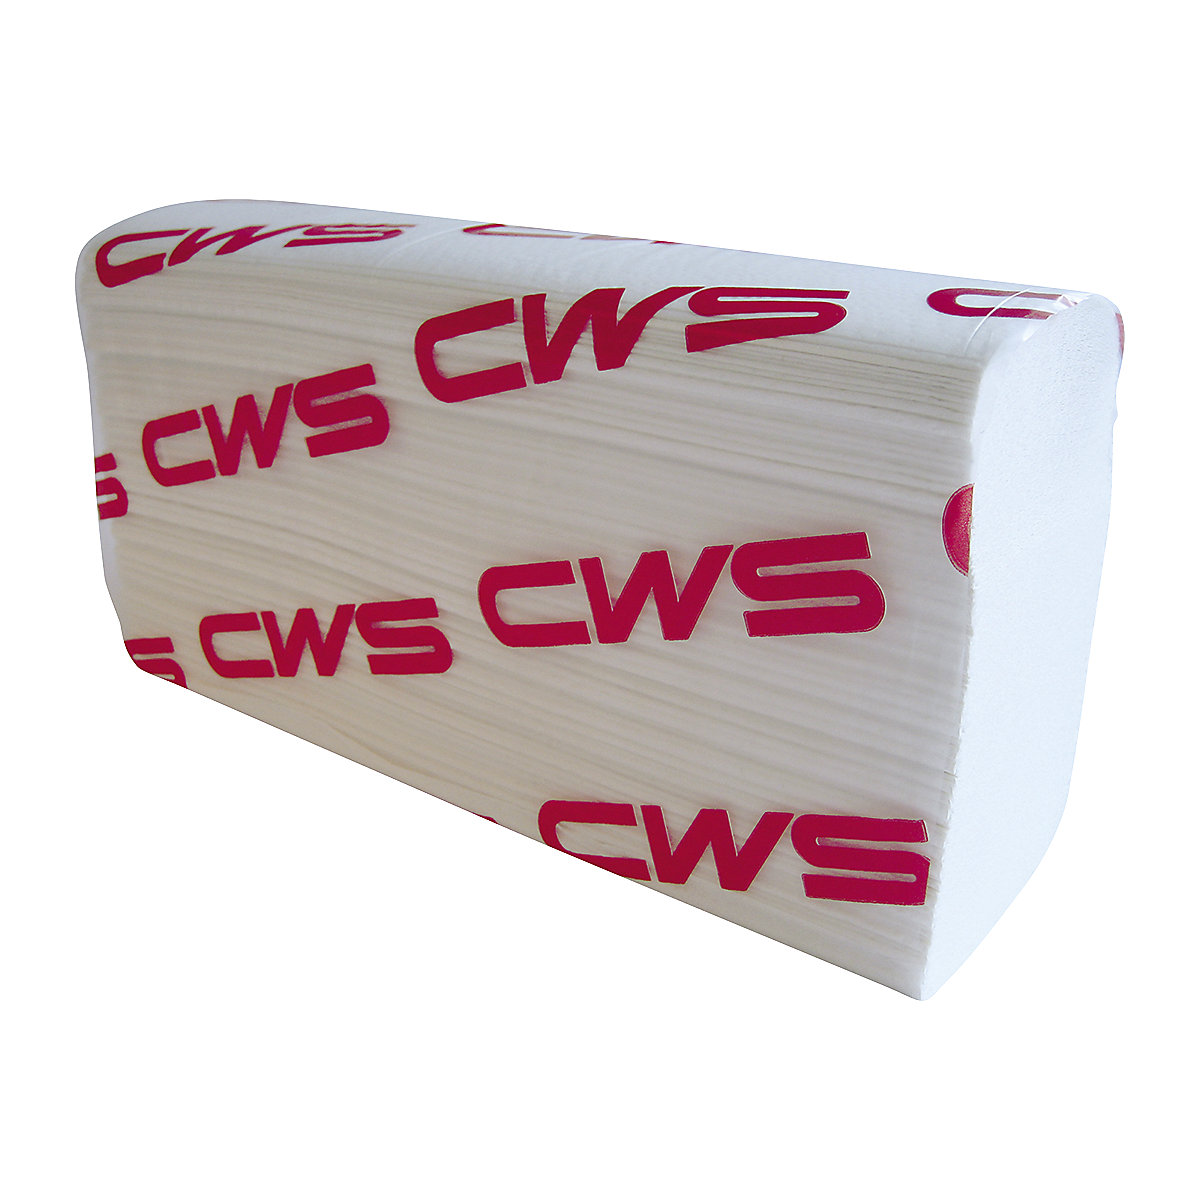 Multifold folded paper towel - CWS